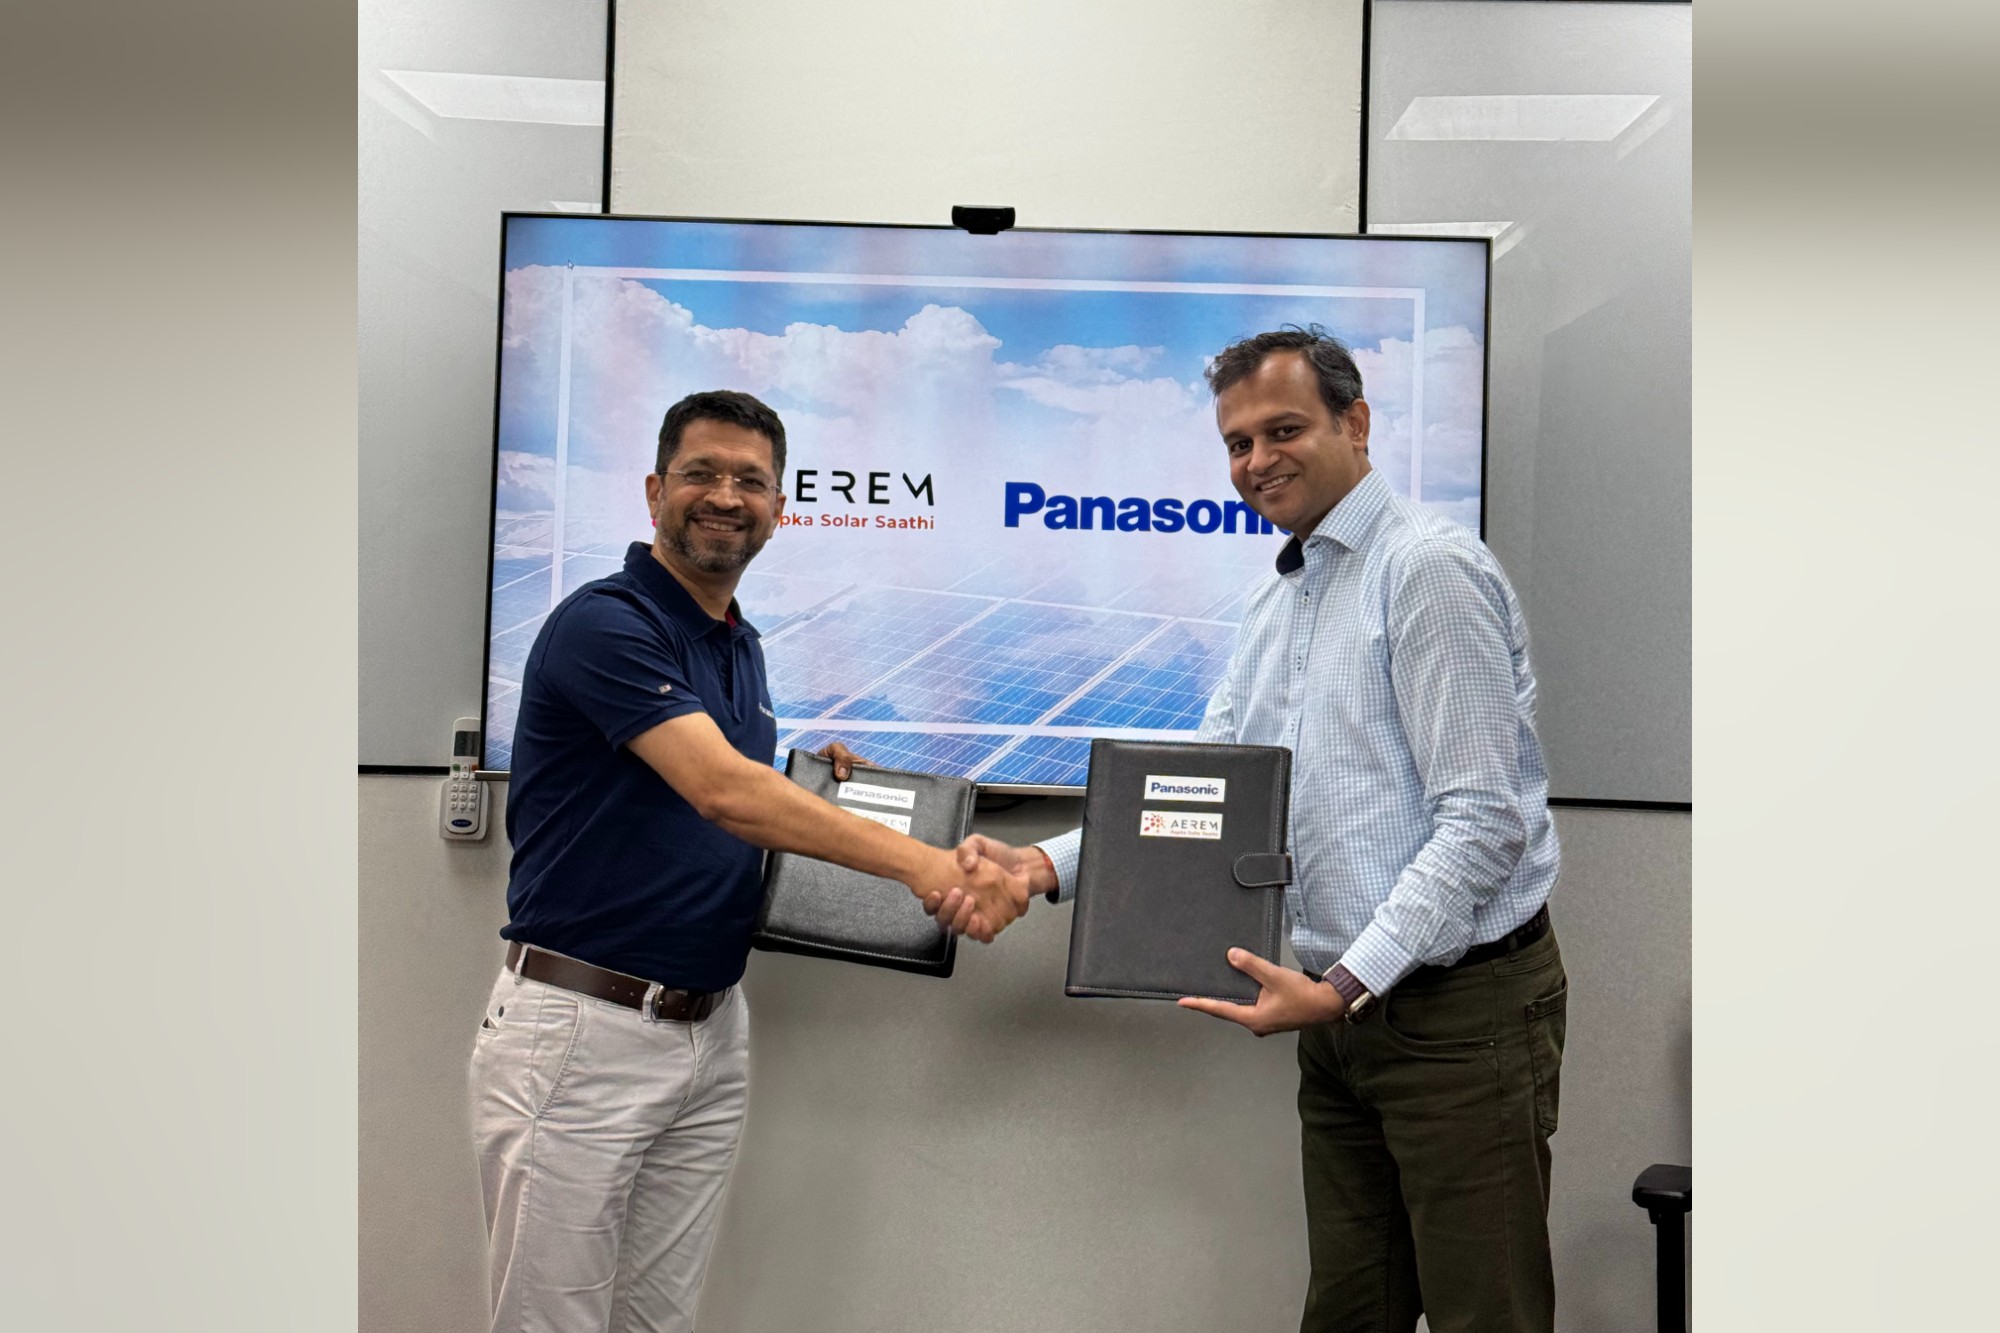 Aerem Solutions and Panasonic partner to drive solar adoption in India